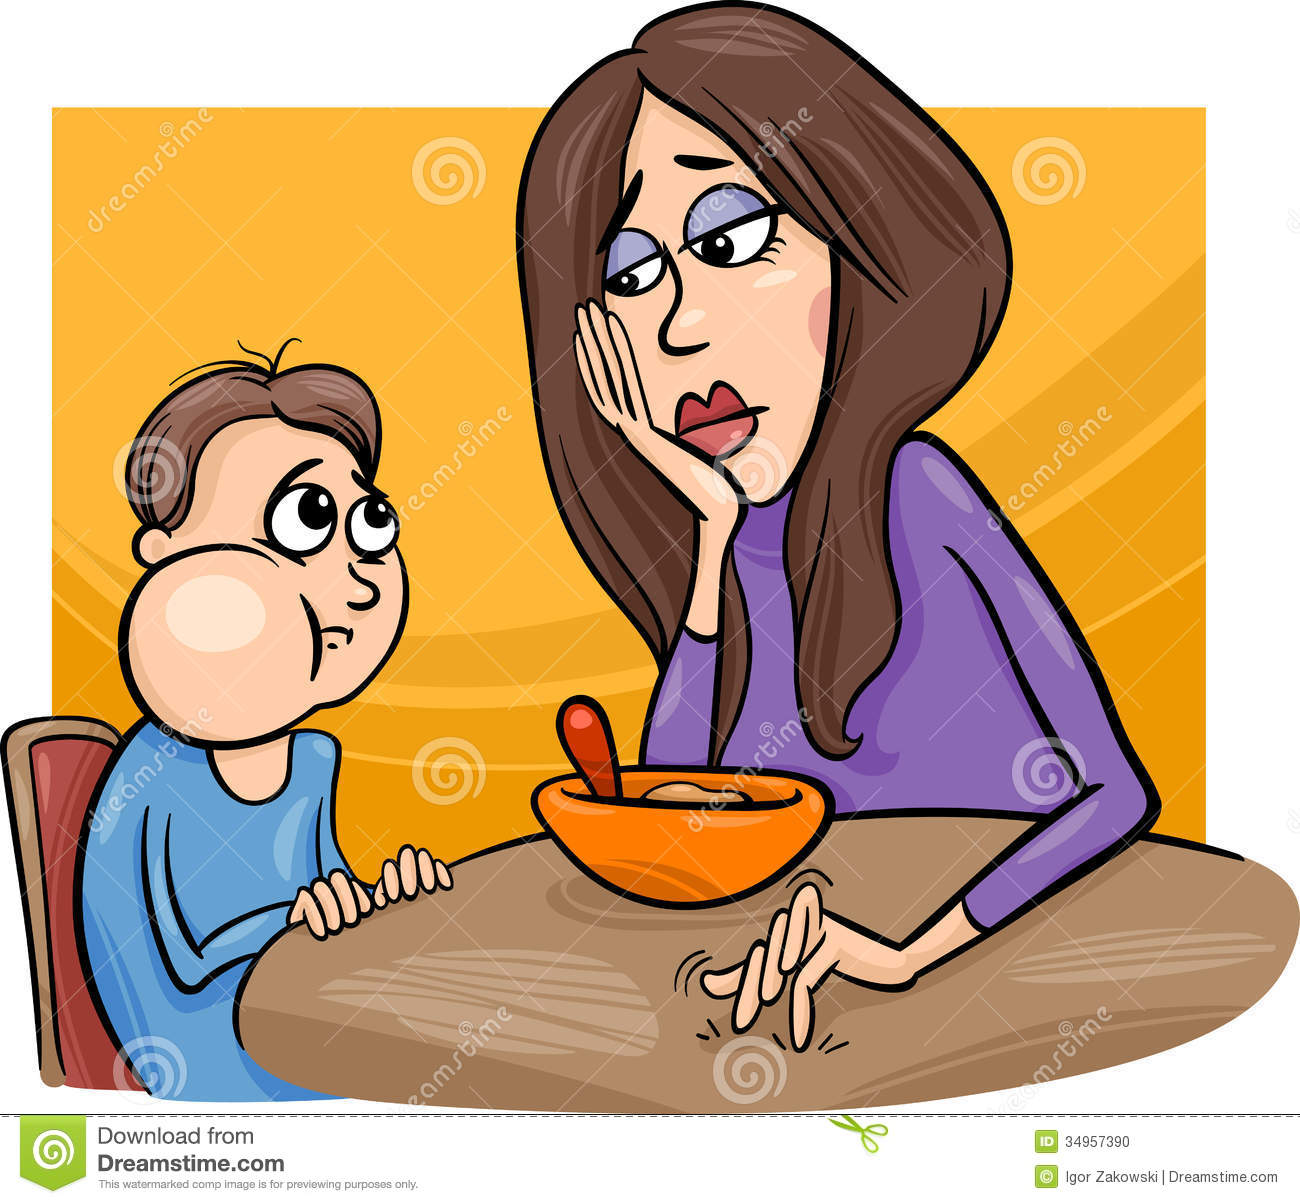 Illustration Of Cute Poor Eater Boy With His Mum Having A Meal